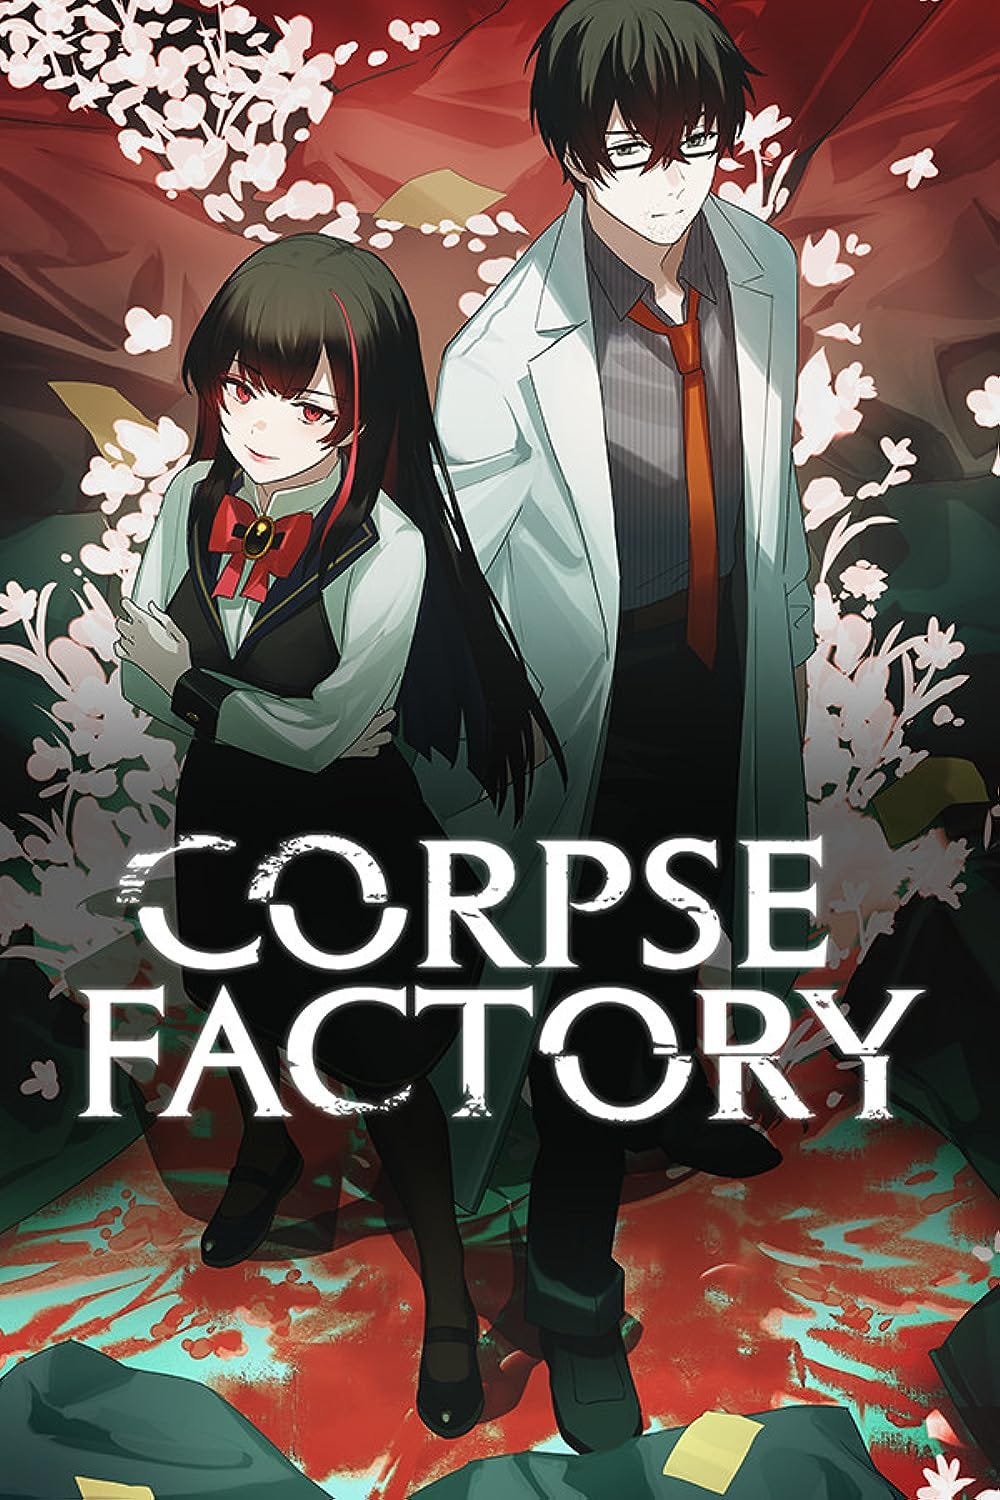 The cover of the VN Corpse Factory depicting two of the main characters standing next to each other.